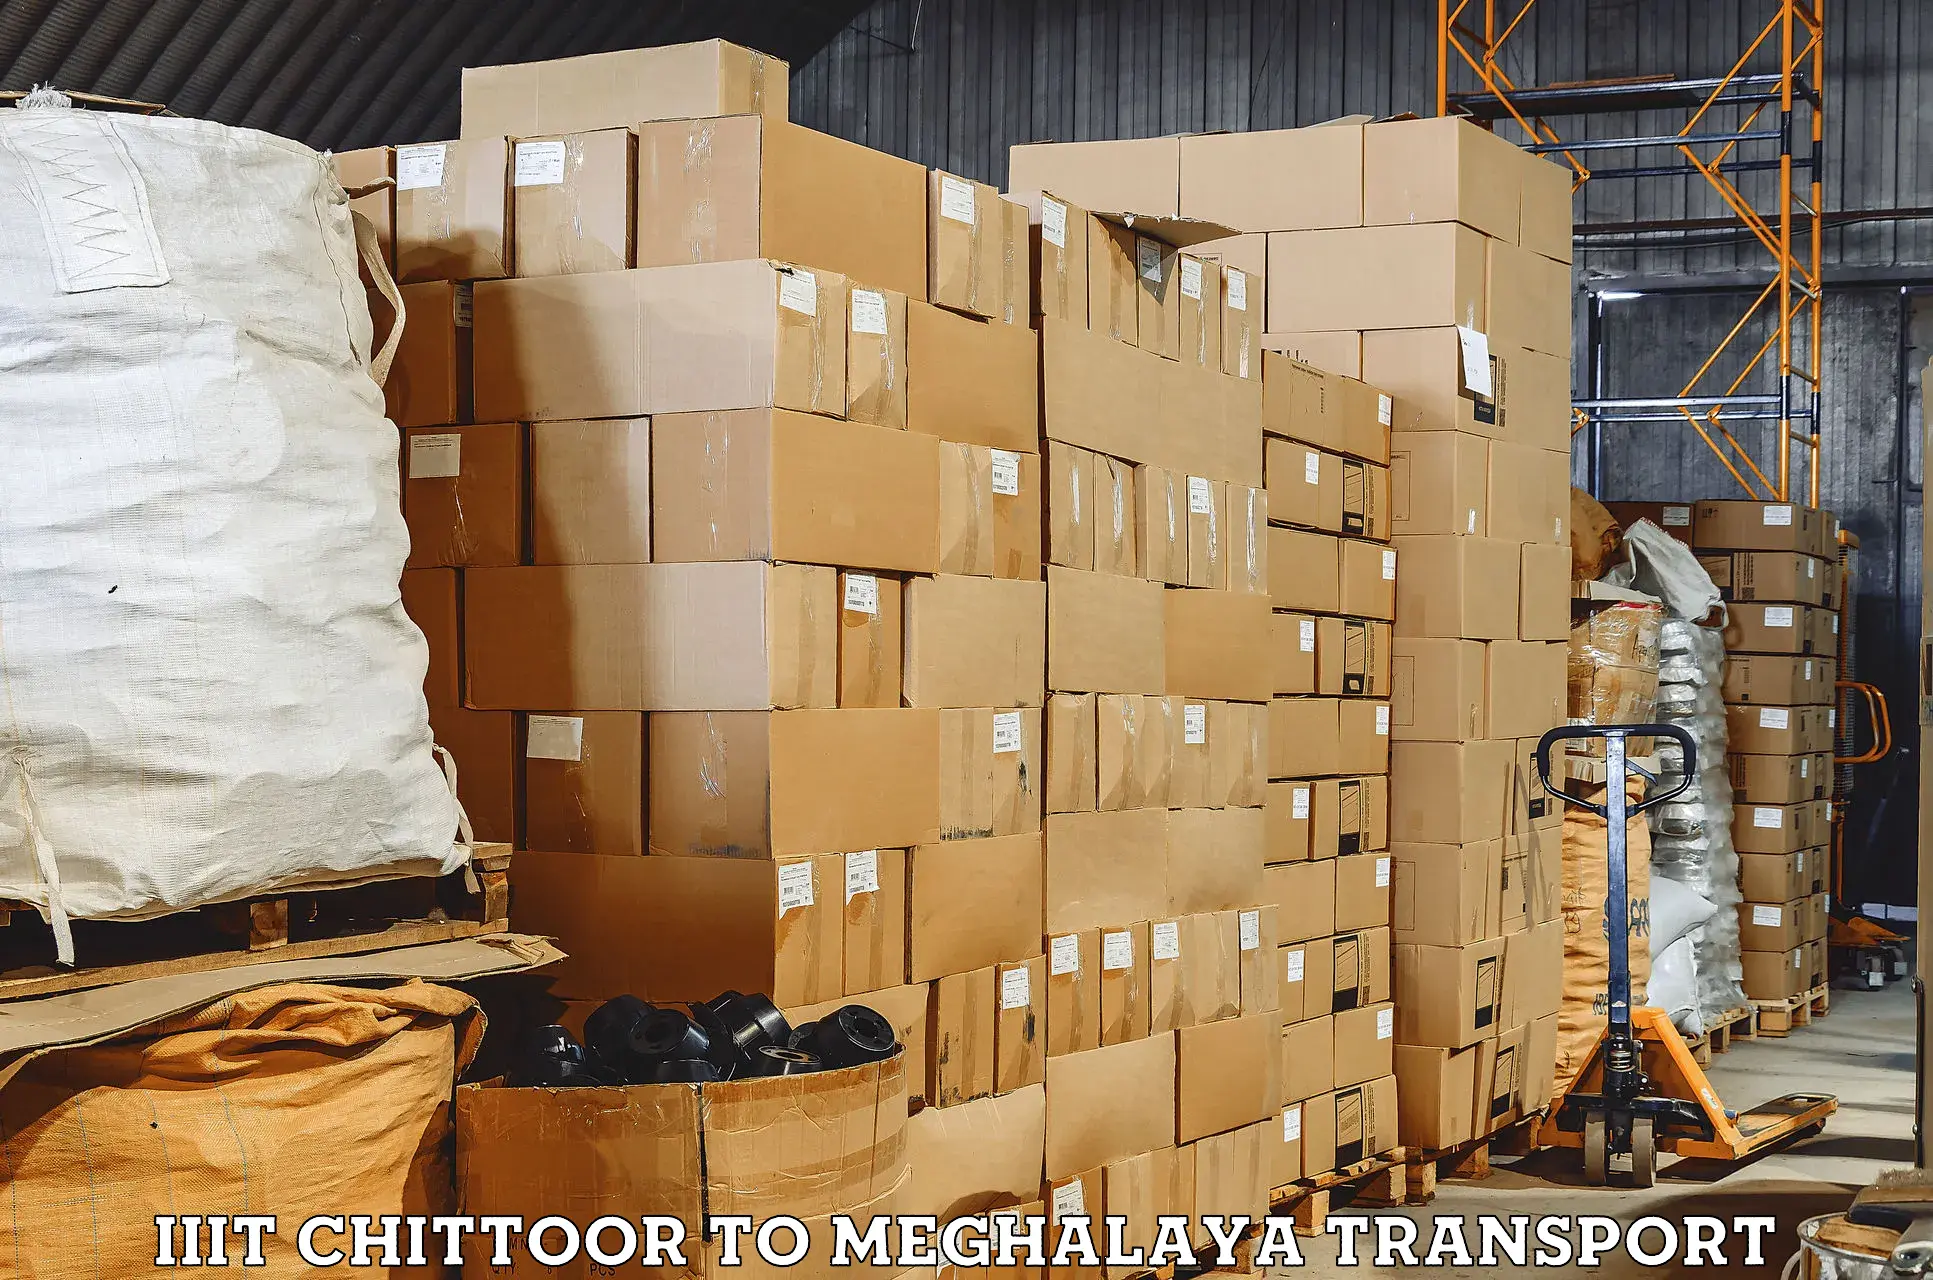 Air freight transport services in IIIT Chittoor to Meghalaya